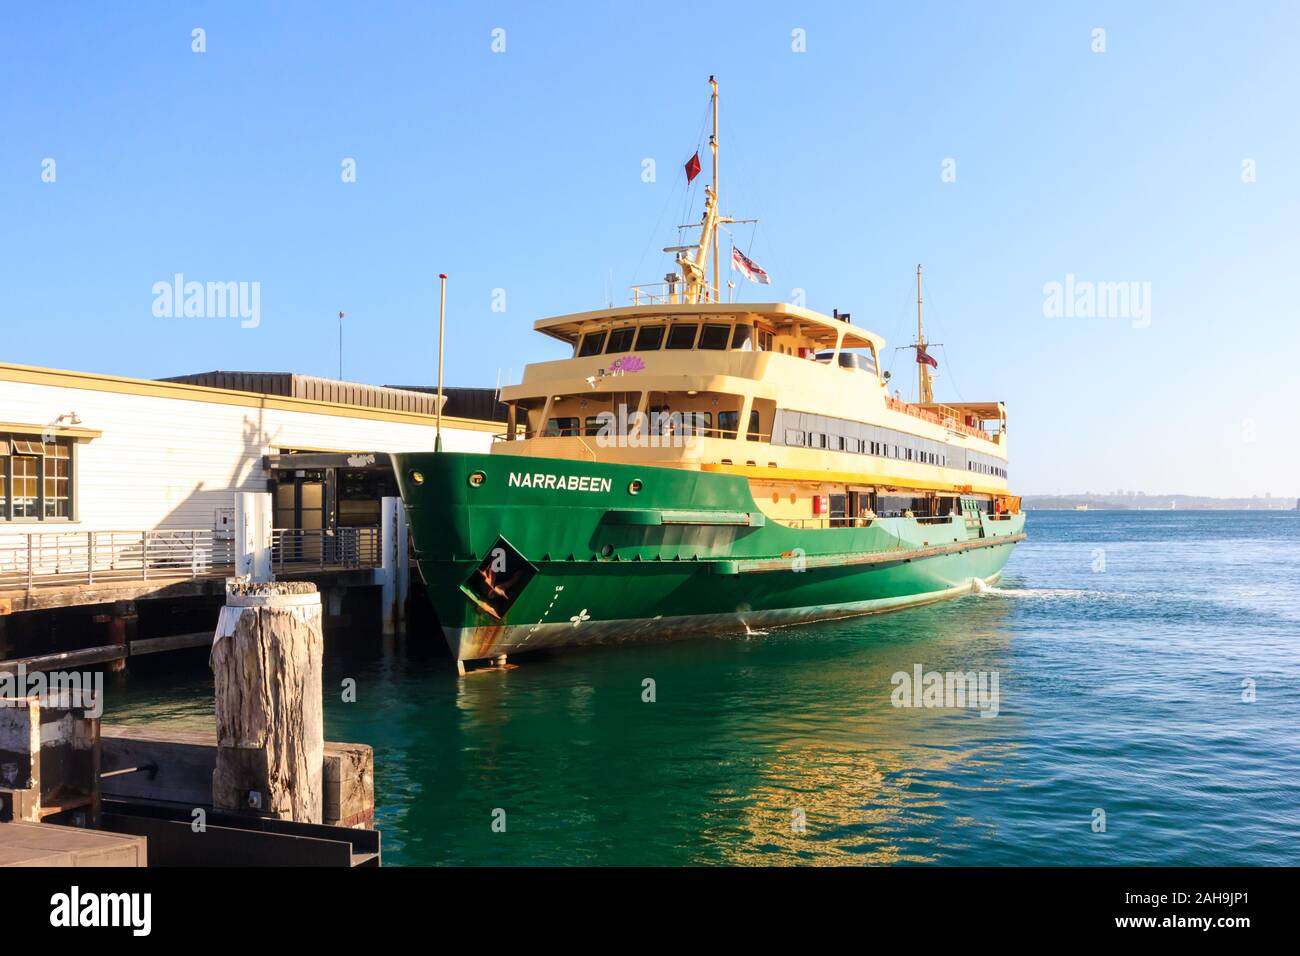 Sydney, Australia - December 30th 2013: The Manly ferry moored at Manly pier. The service runs to Circular Quay in central Sydney. Stock Photo